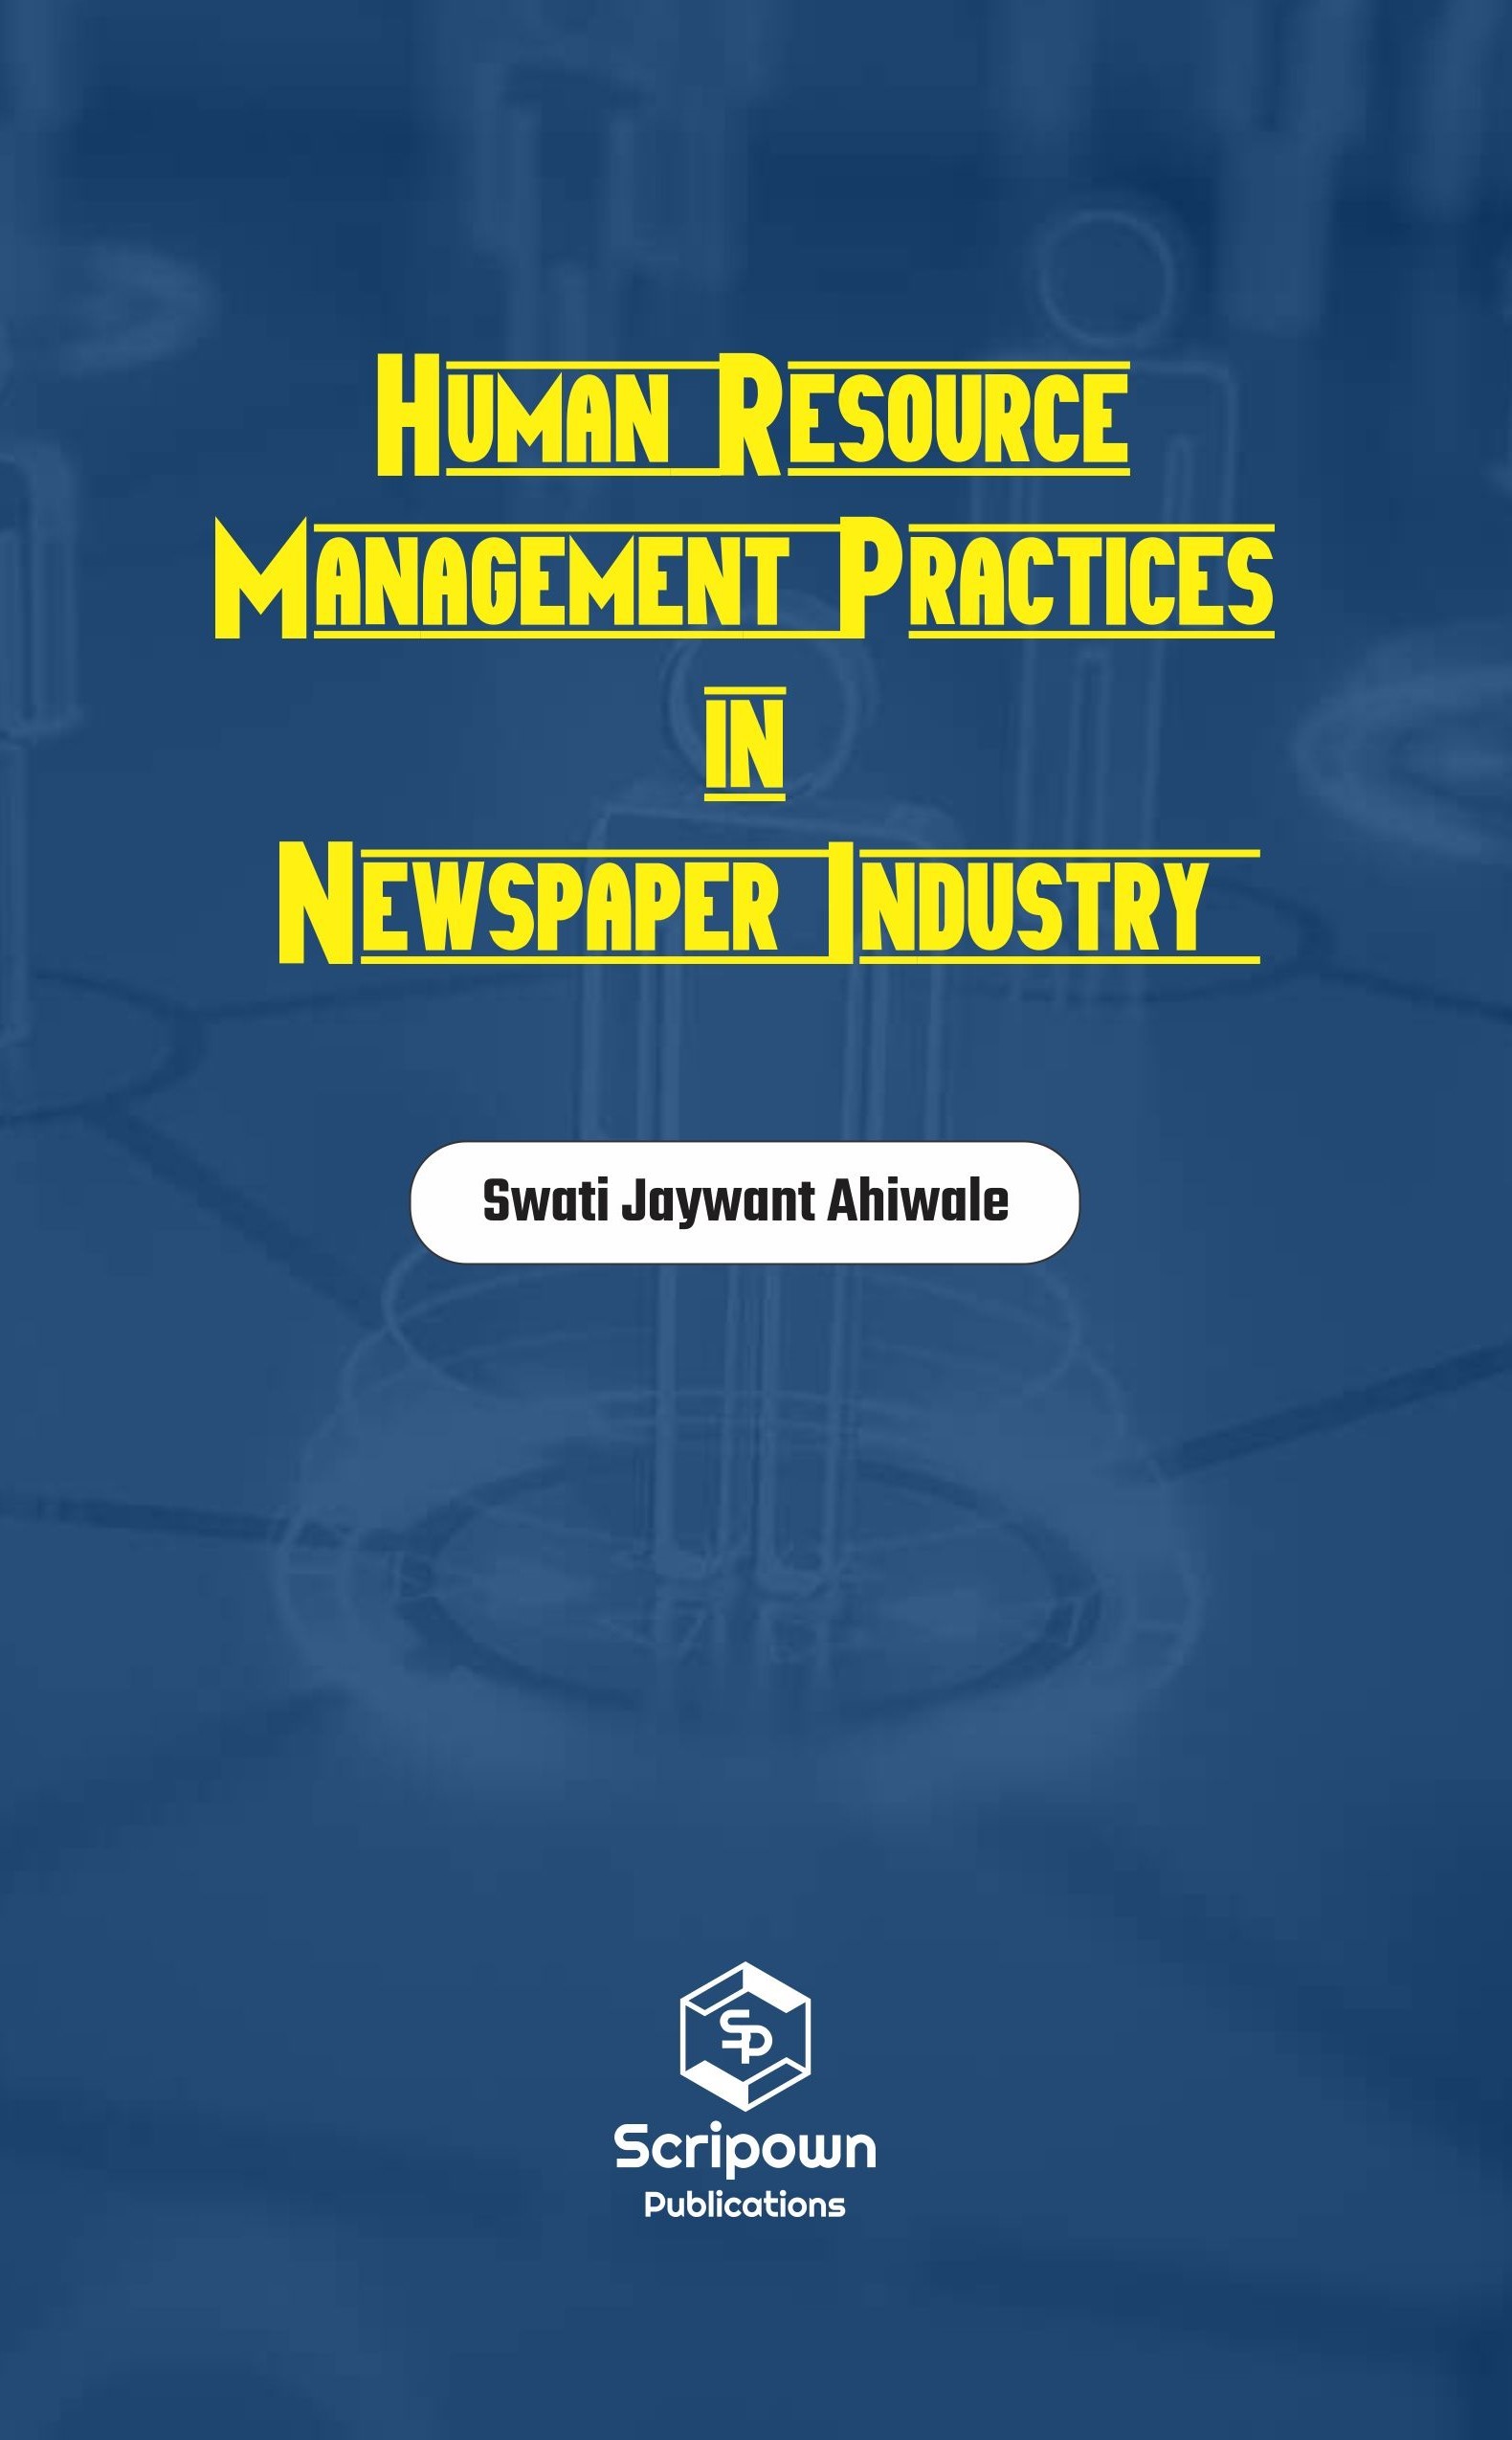 Human Resource Management Practices in Newspaper Indudtry